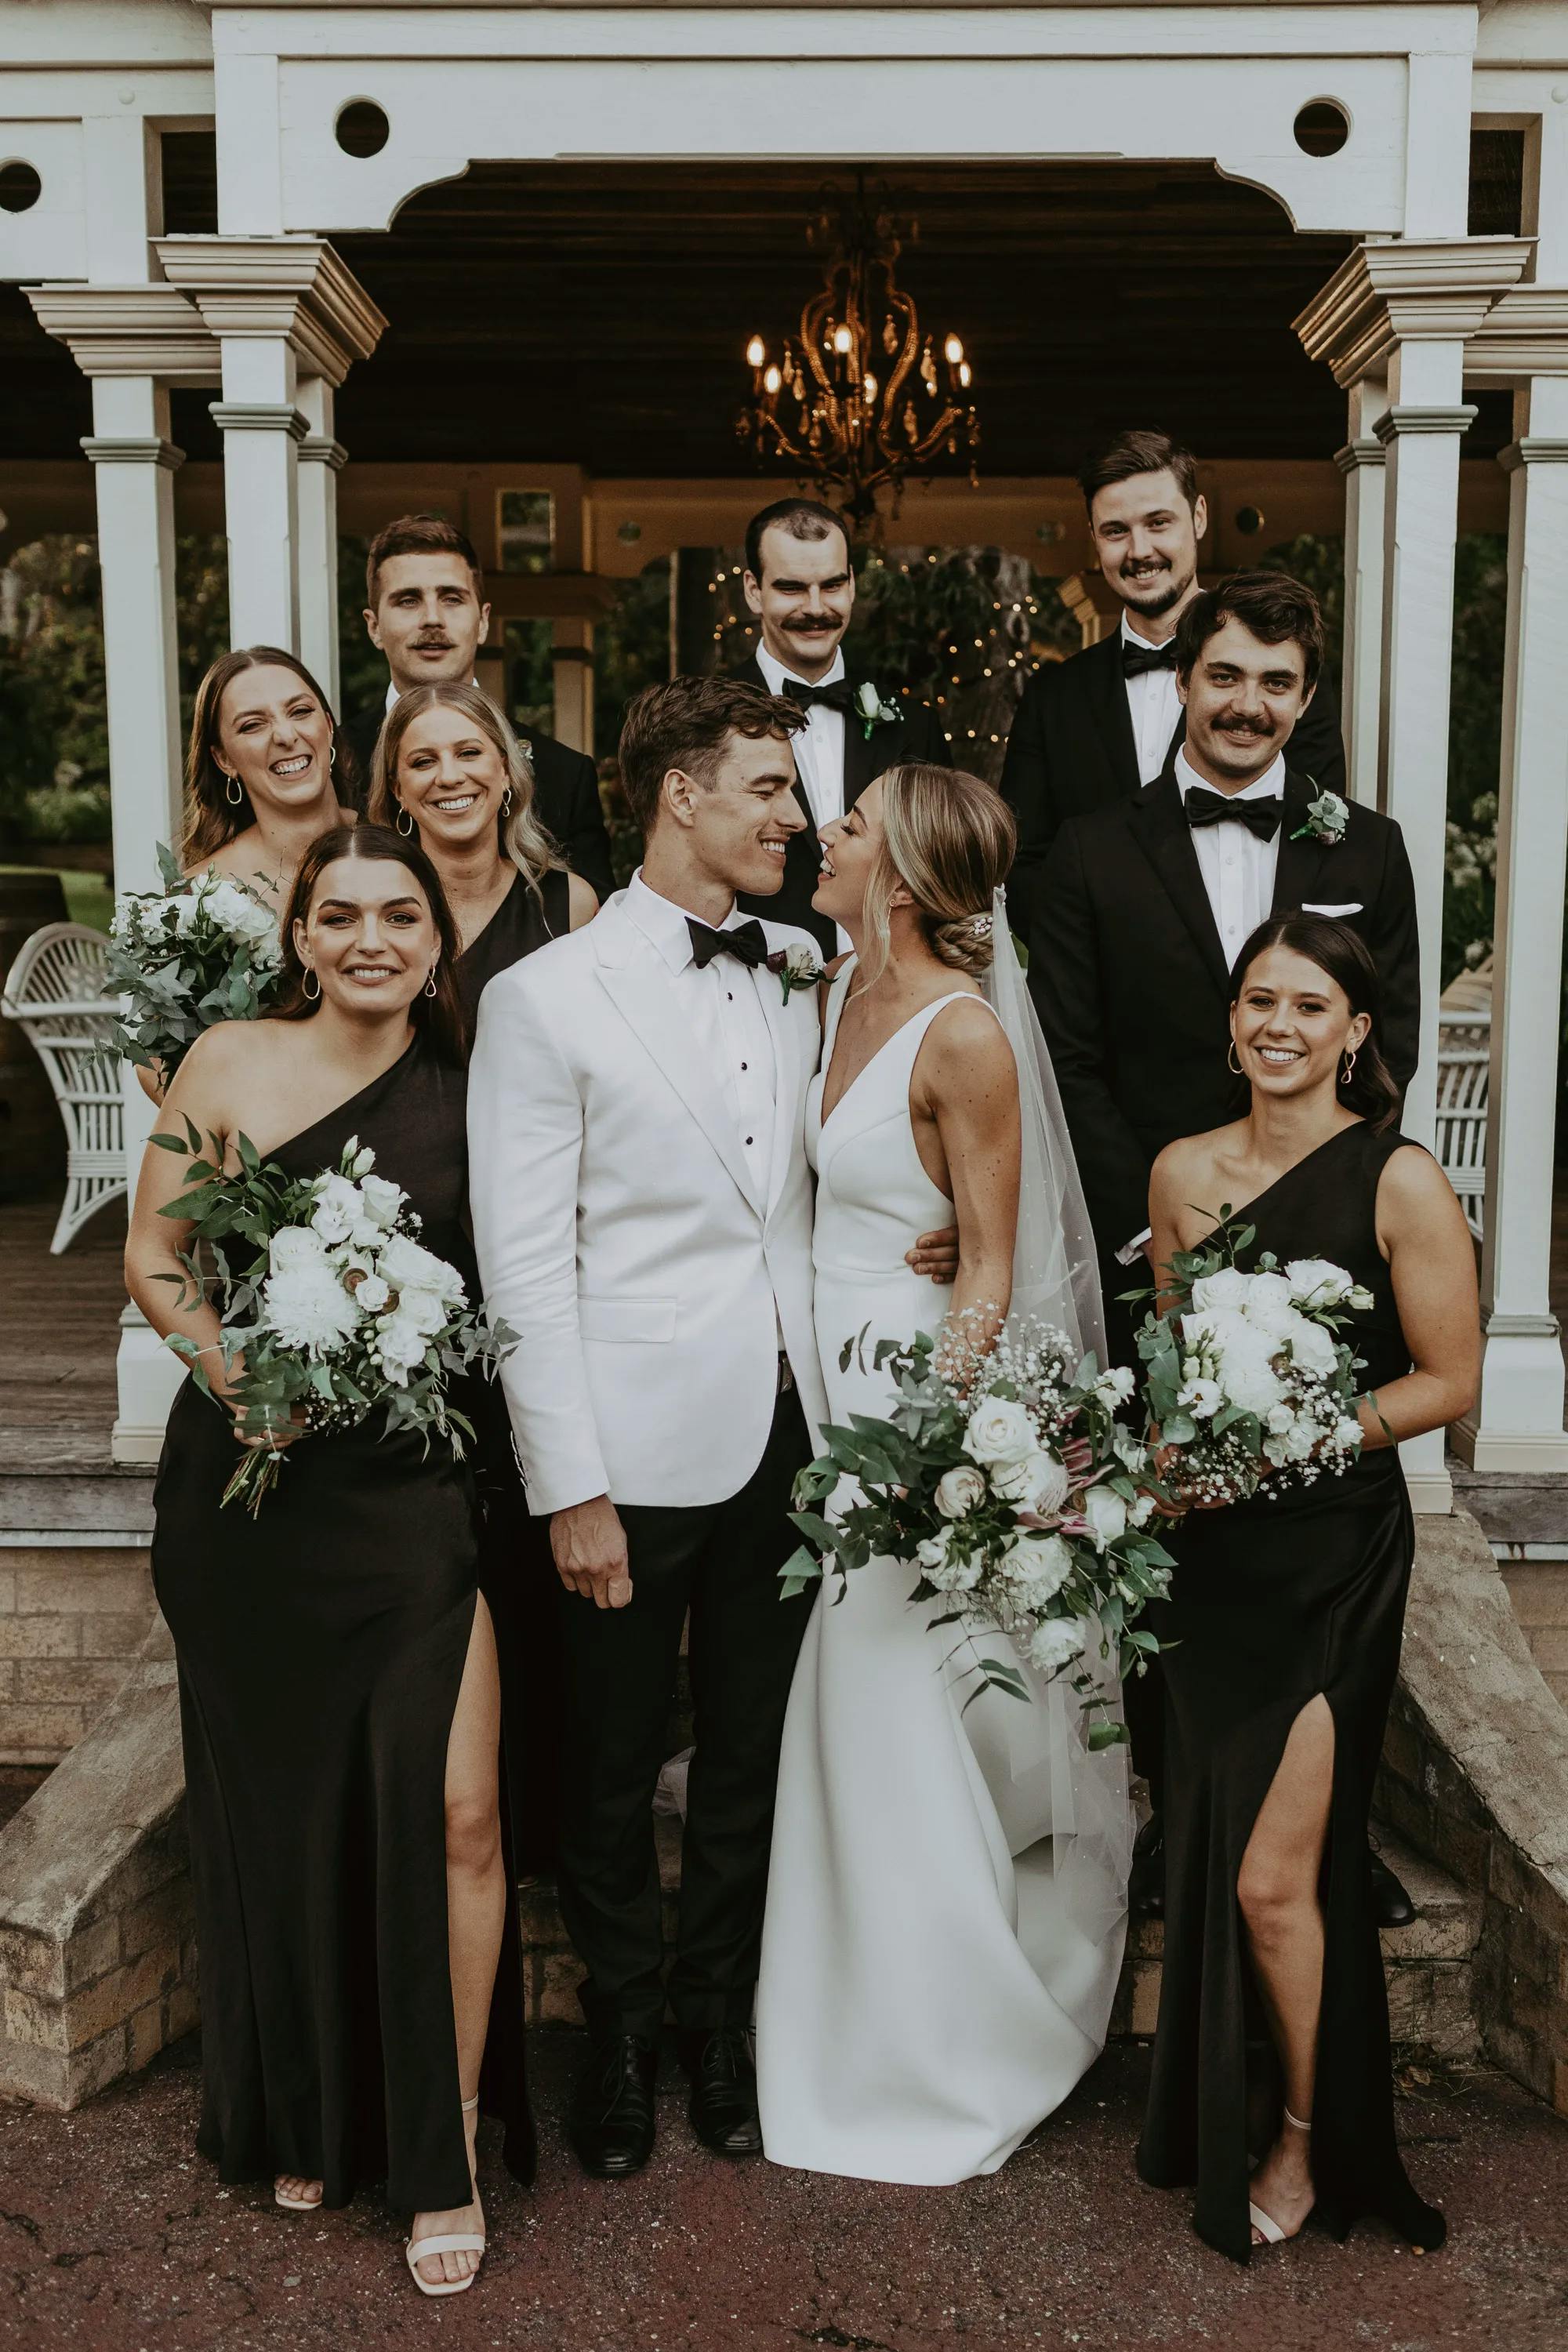 A newlywed couple stands in front of a group of smiling bridesmaids and groomsmen. The bride wears a white gown and veil, while the groom dons a white tuxedo jacket. The bridesmaids wear black dresses with bouquets, and the groomsmen are in black tuxedos. They are on the steps of a wooden gazebo.